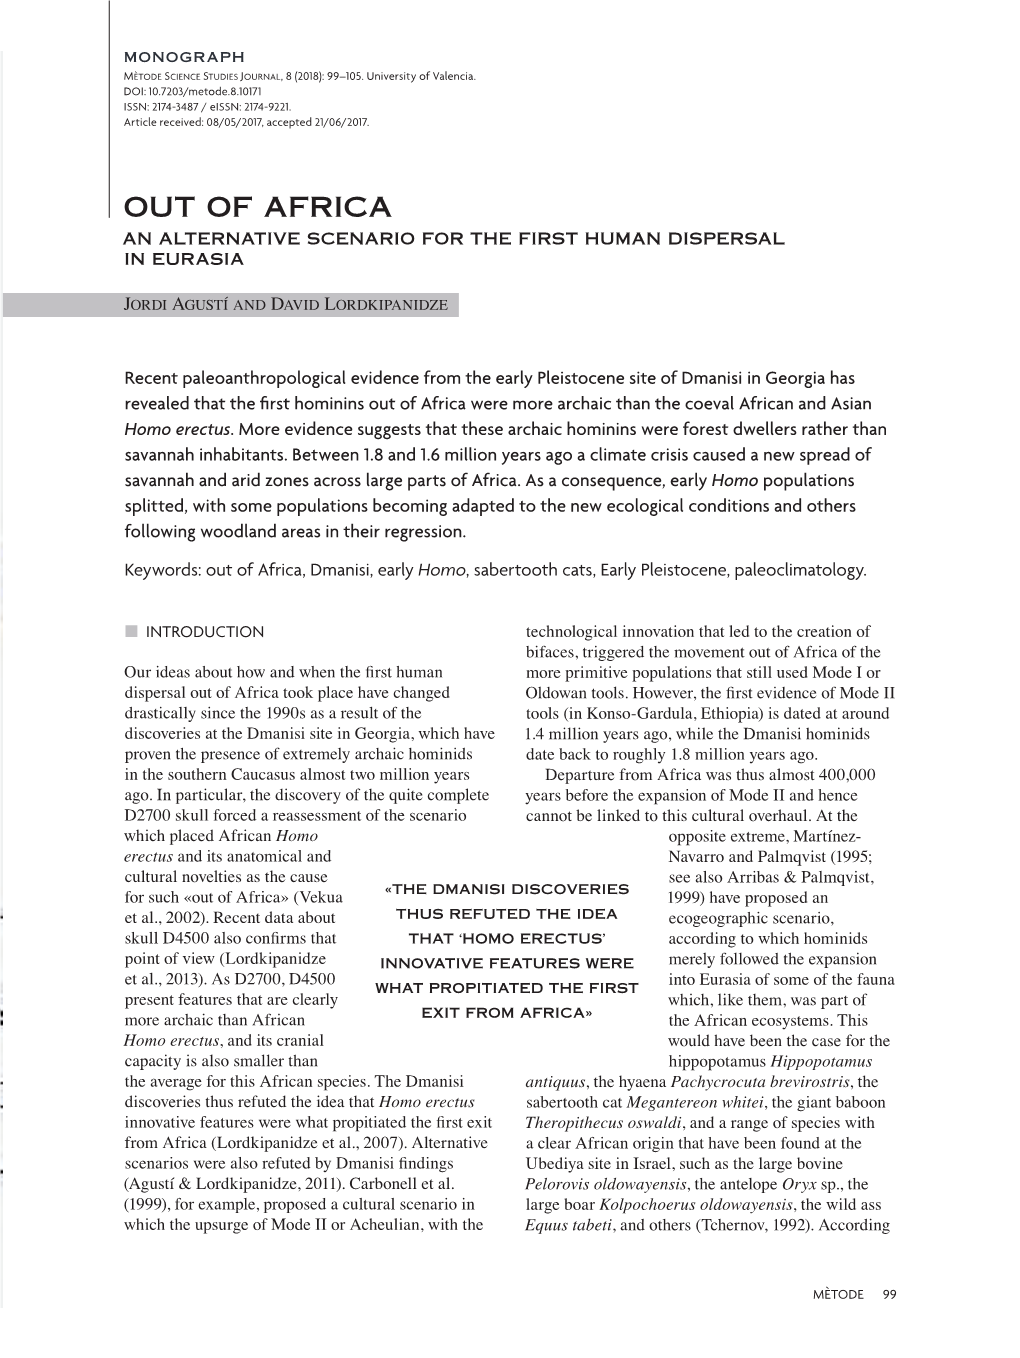 Out of Africa an Alternative Scenario for the First Human Dispersal in Eurasia